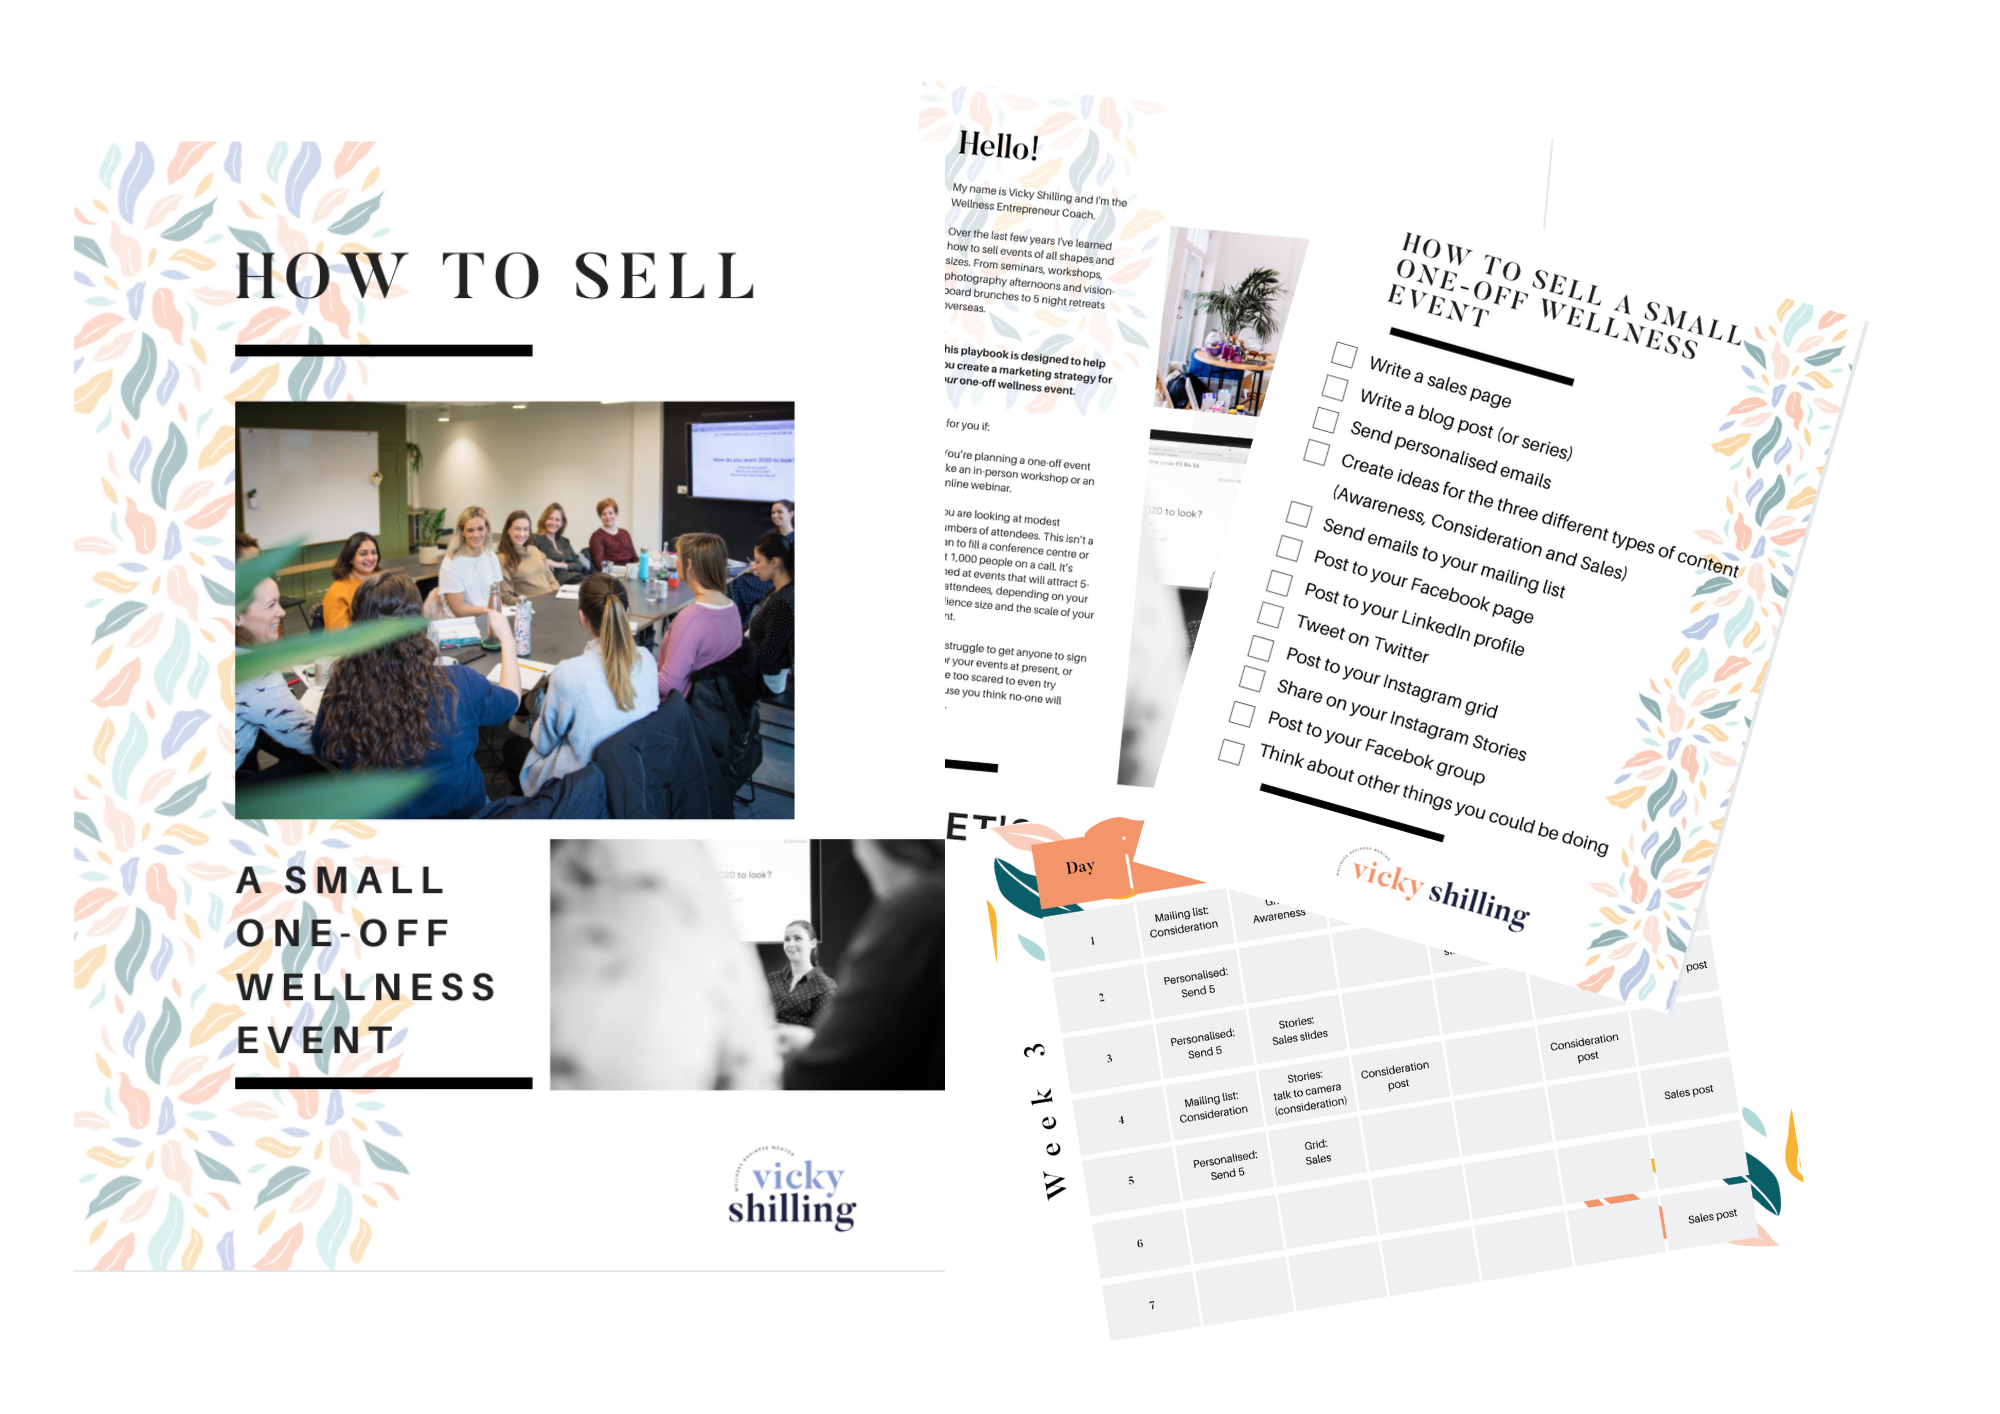 How to sell events playbook